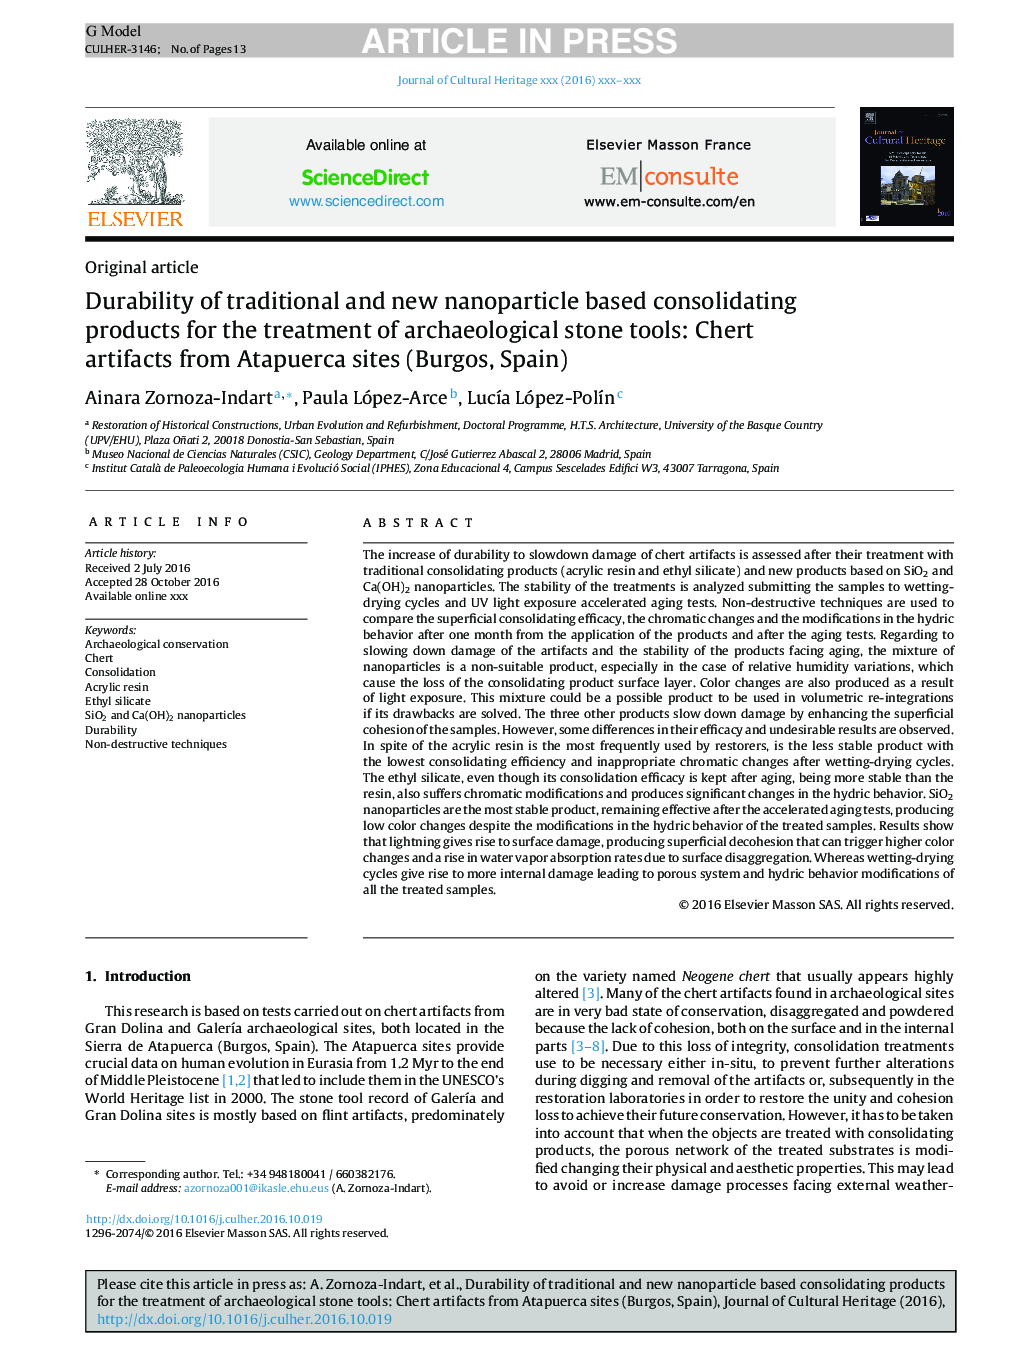 Durability of traditional and new nanoparticle based consolidating products for the treatment of archaeological stone tools: Chert artifacts from Atapuerca sites (Burgos, Spain)